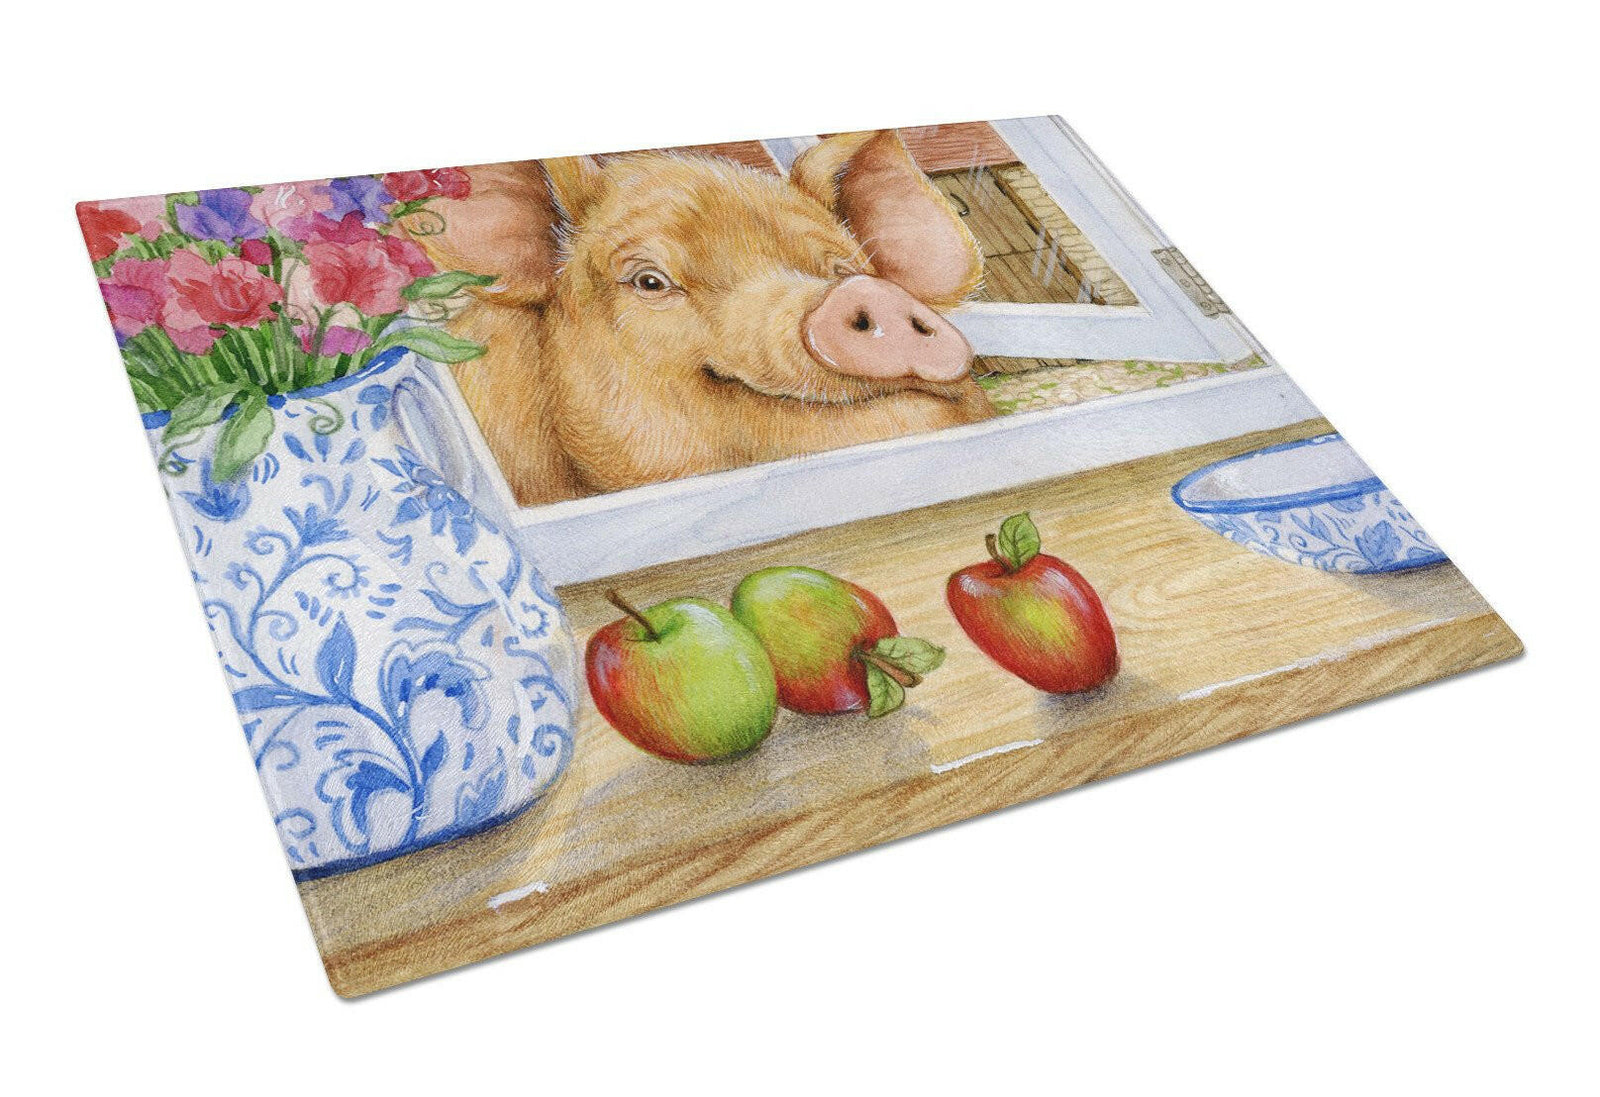 Pig trying to reach the Apple in the Window Glass Cutting Board Large CDCO0352LCB by Caroline's Treasures